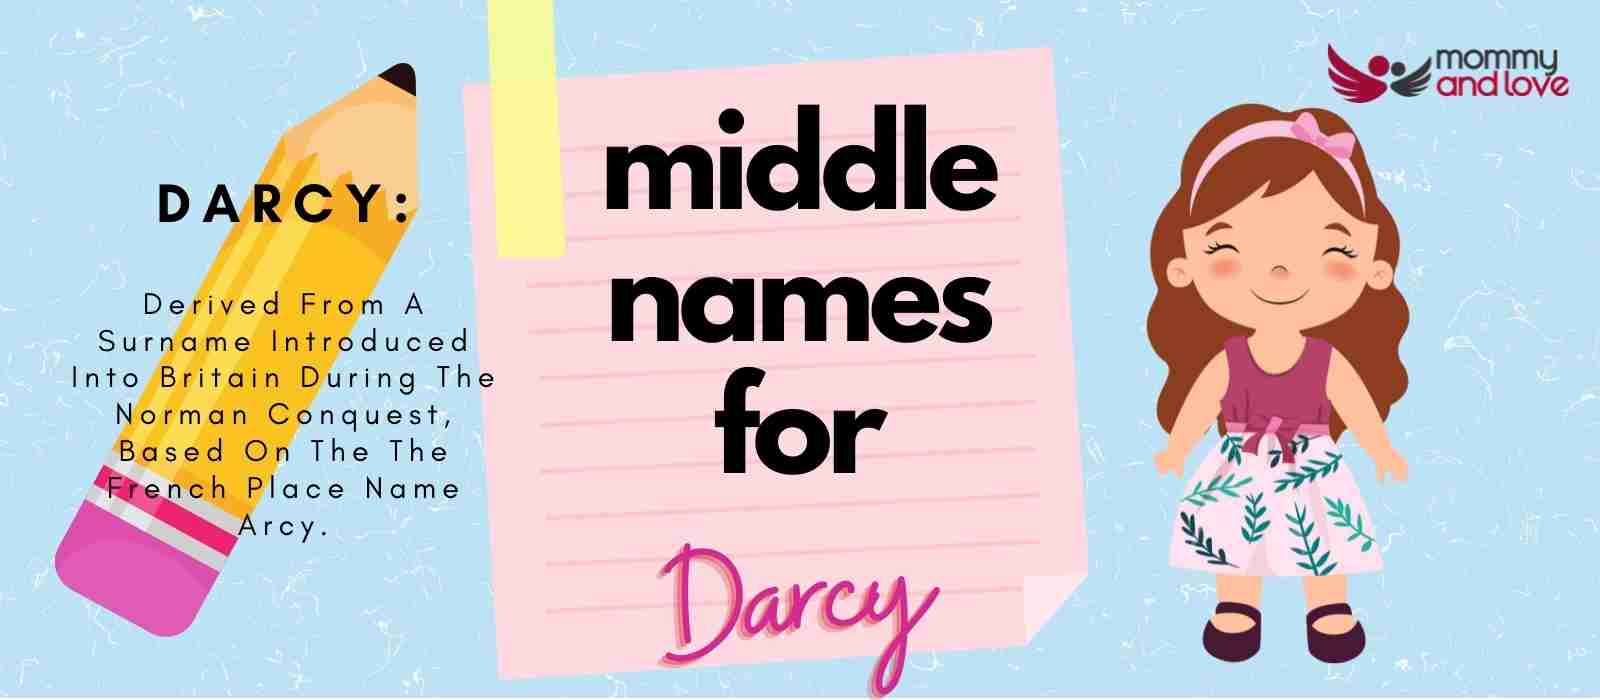 Middle Names for Darcy